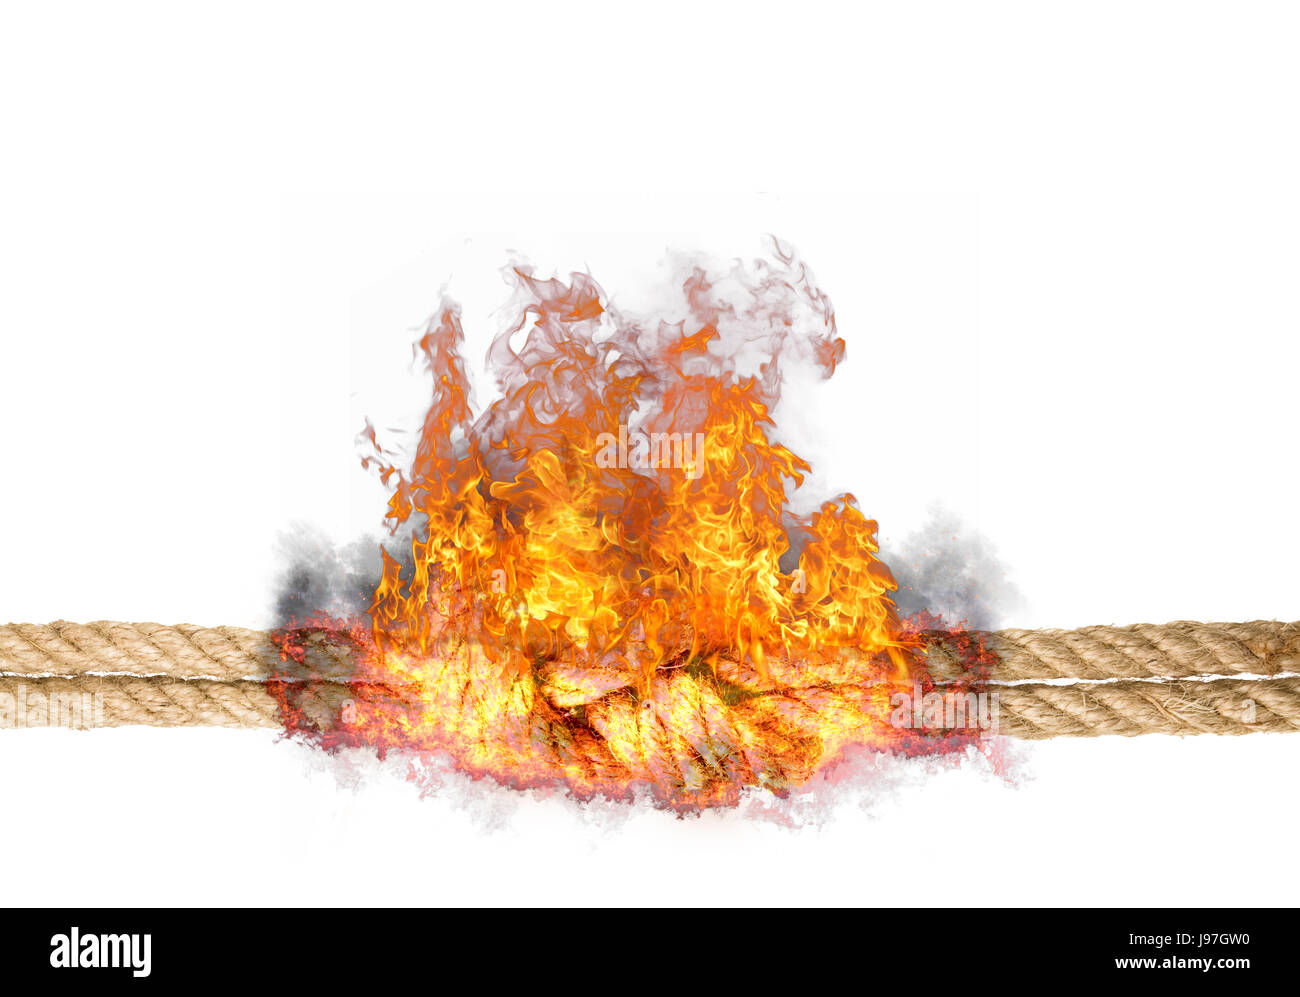 Strong rope with a knot, bursted into flames, isolated against the white colored background Stock Photo